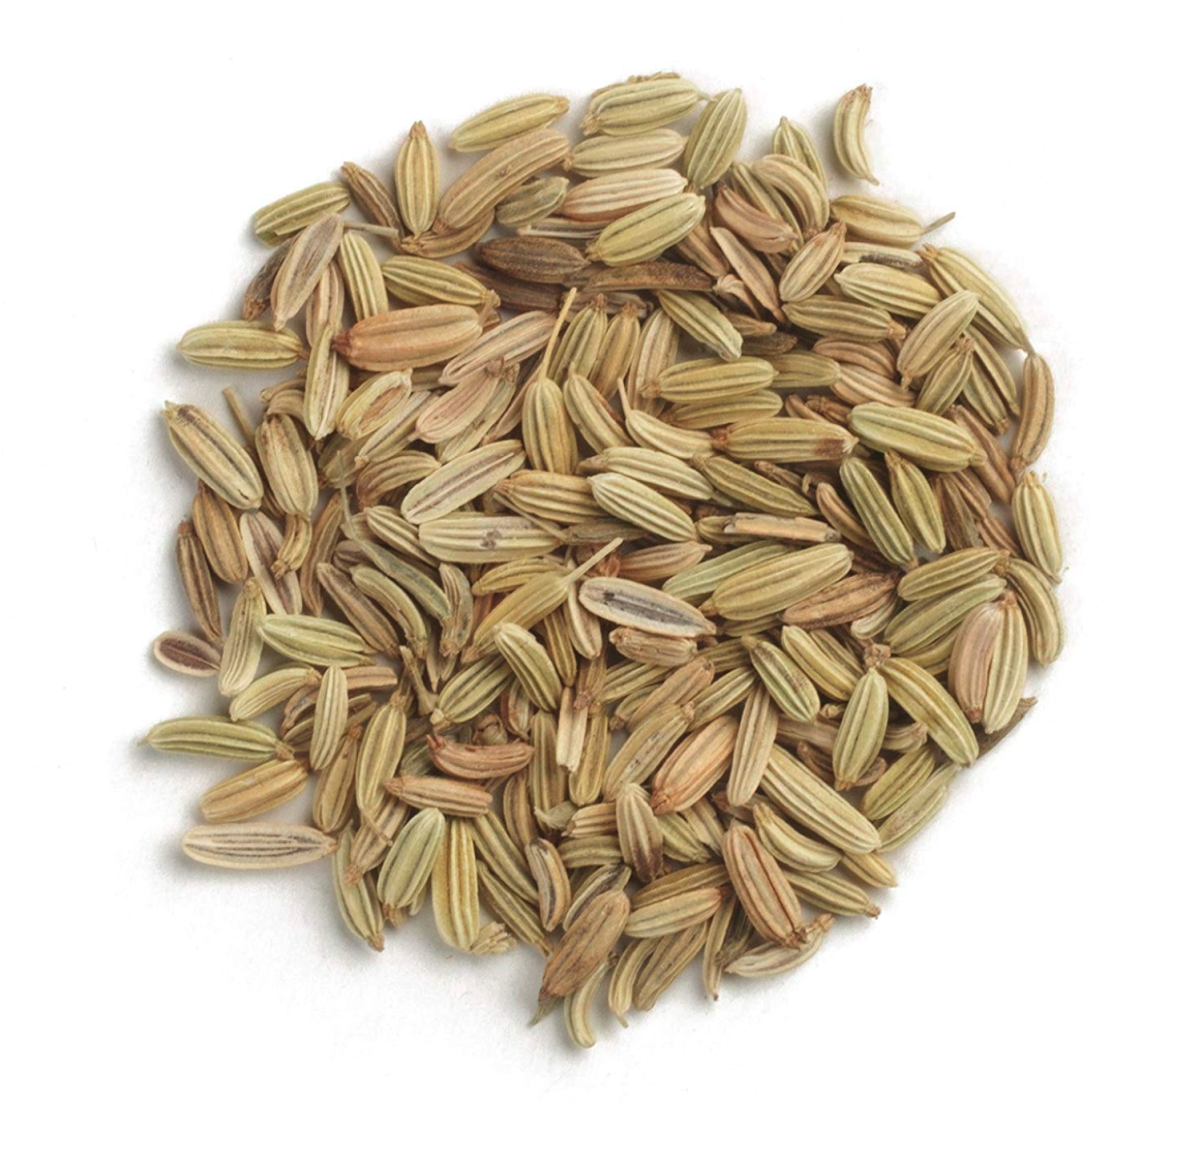 The ancient Greeks and Romans believed they got long life and strength by drinking fennel tea.